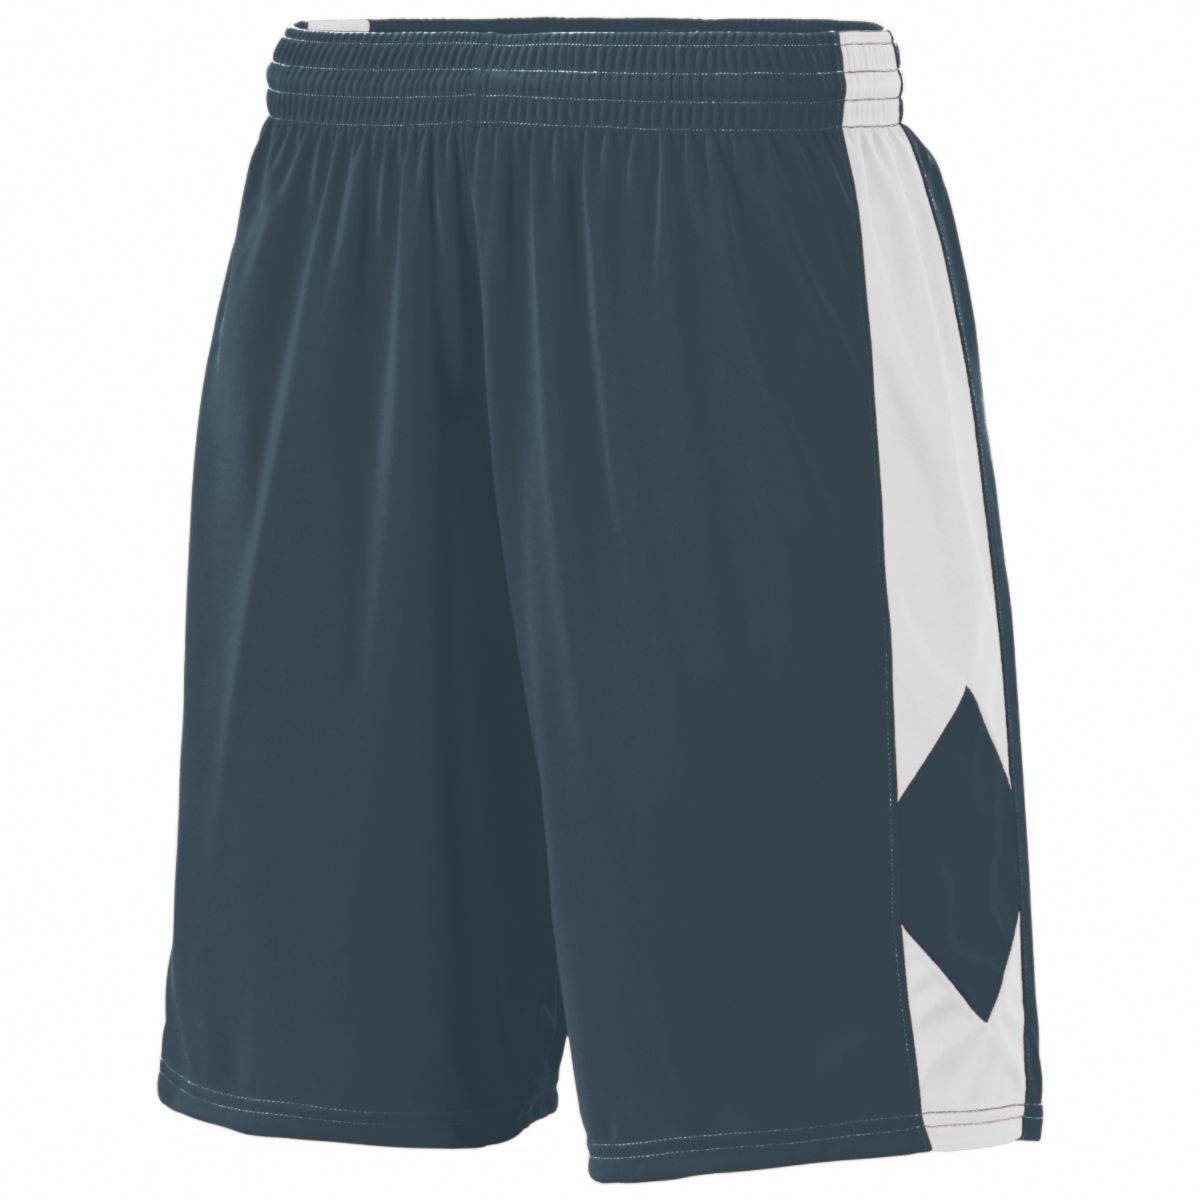 Augusta Sportswear Youth Block Out Shorts in Slate/White  -Part of the Youth, Youth-Shorts, Augusta-Products, Basketball, All-Sports, All-Sports-1 product lines at KanaleyCreations.com